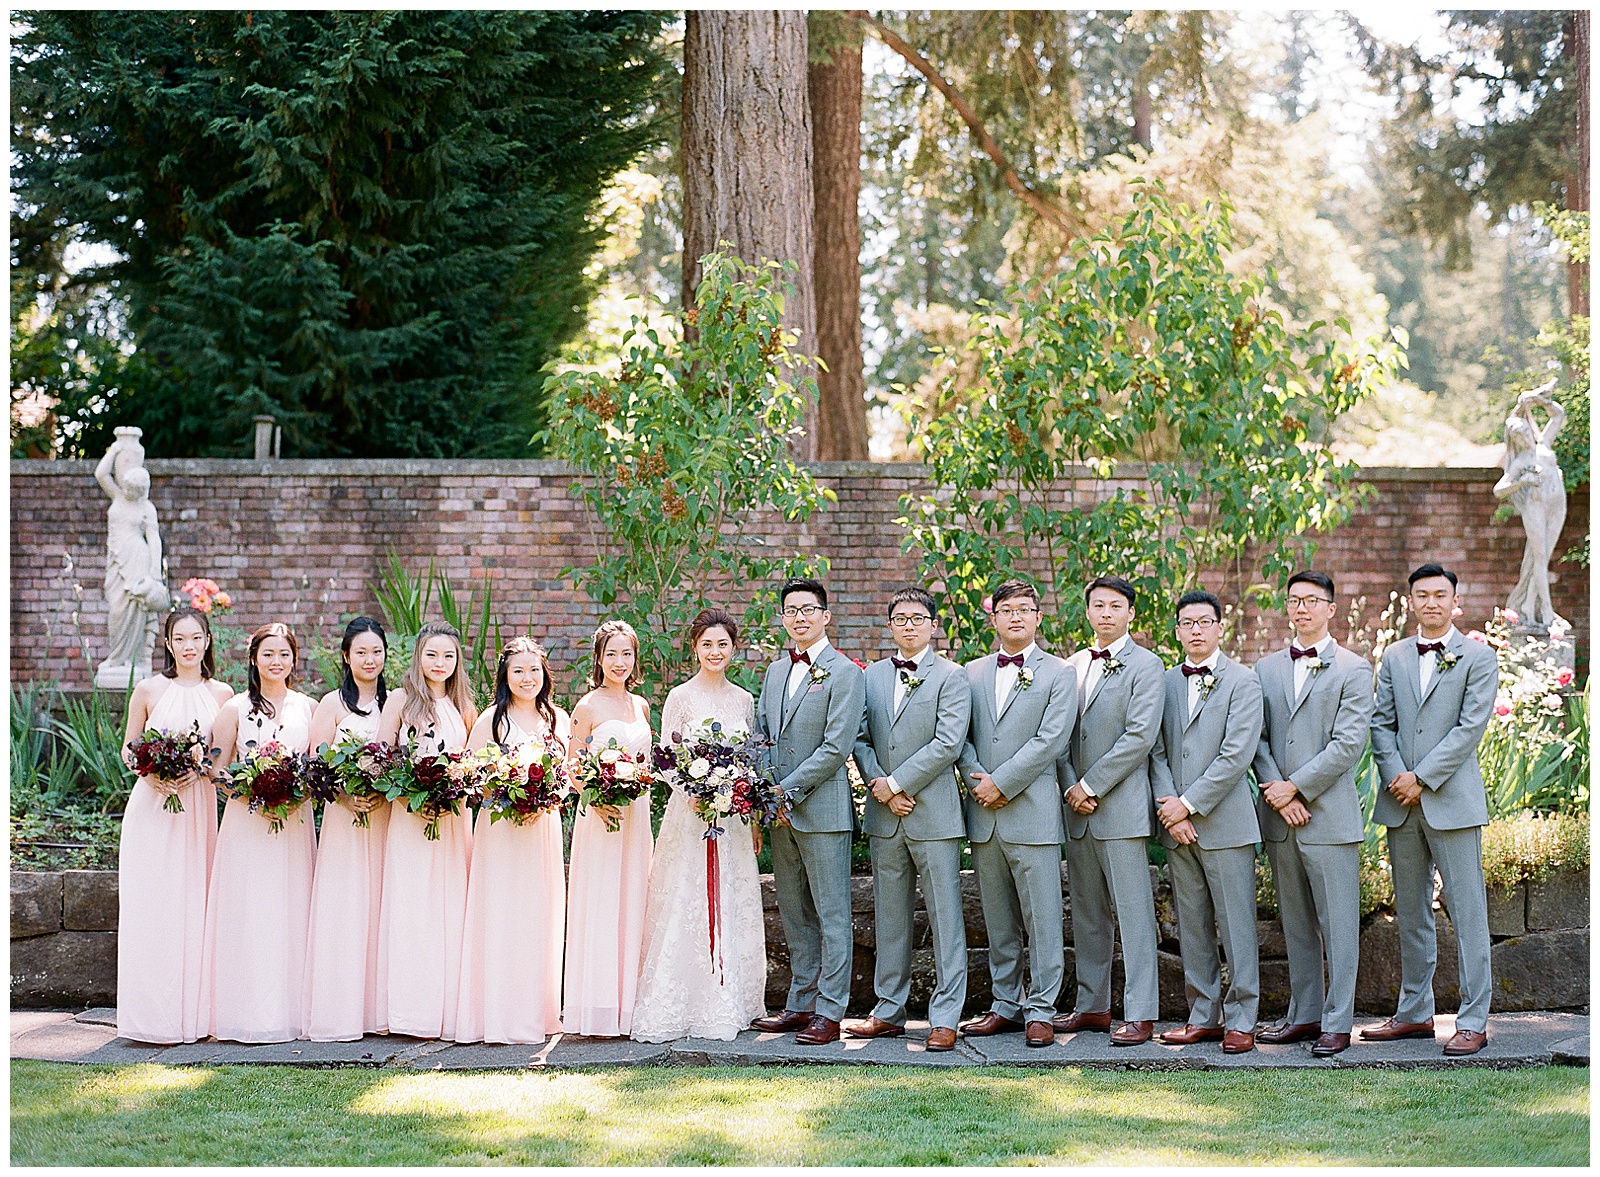 How To Get The Best Wedding Party Photos On Your Wedding Day The Ganeys Fine Art Film 4401